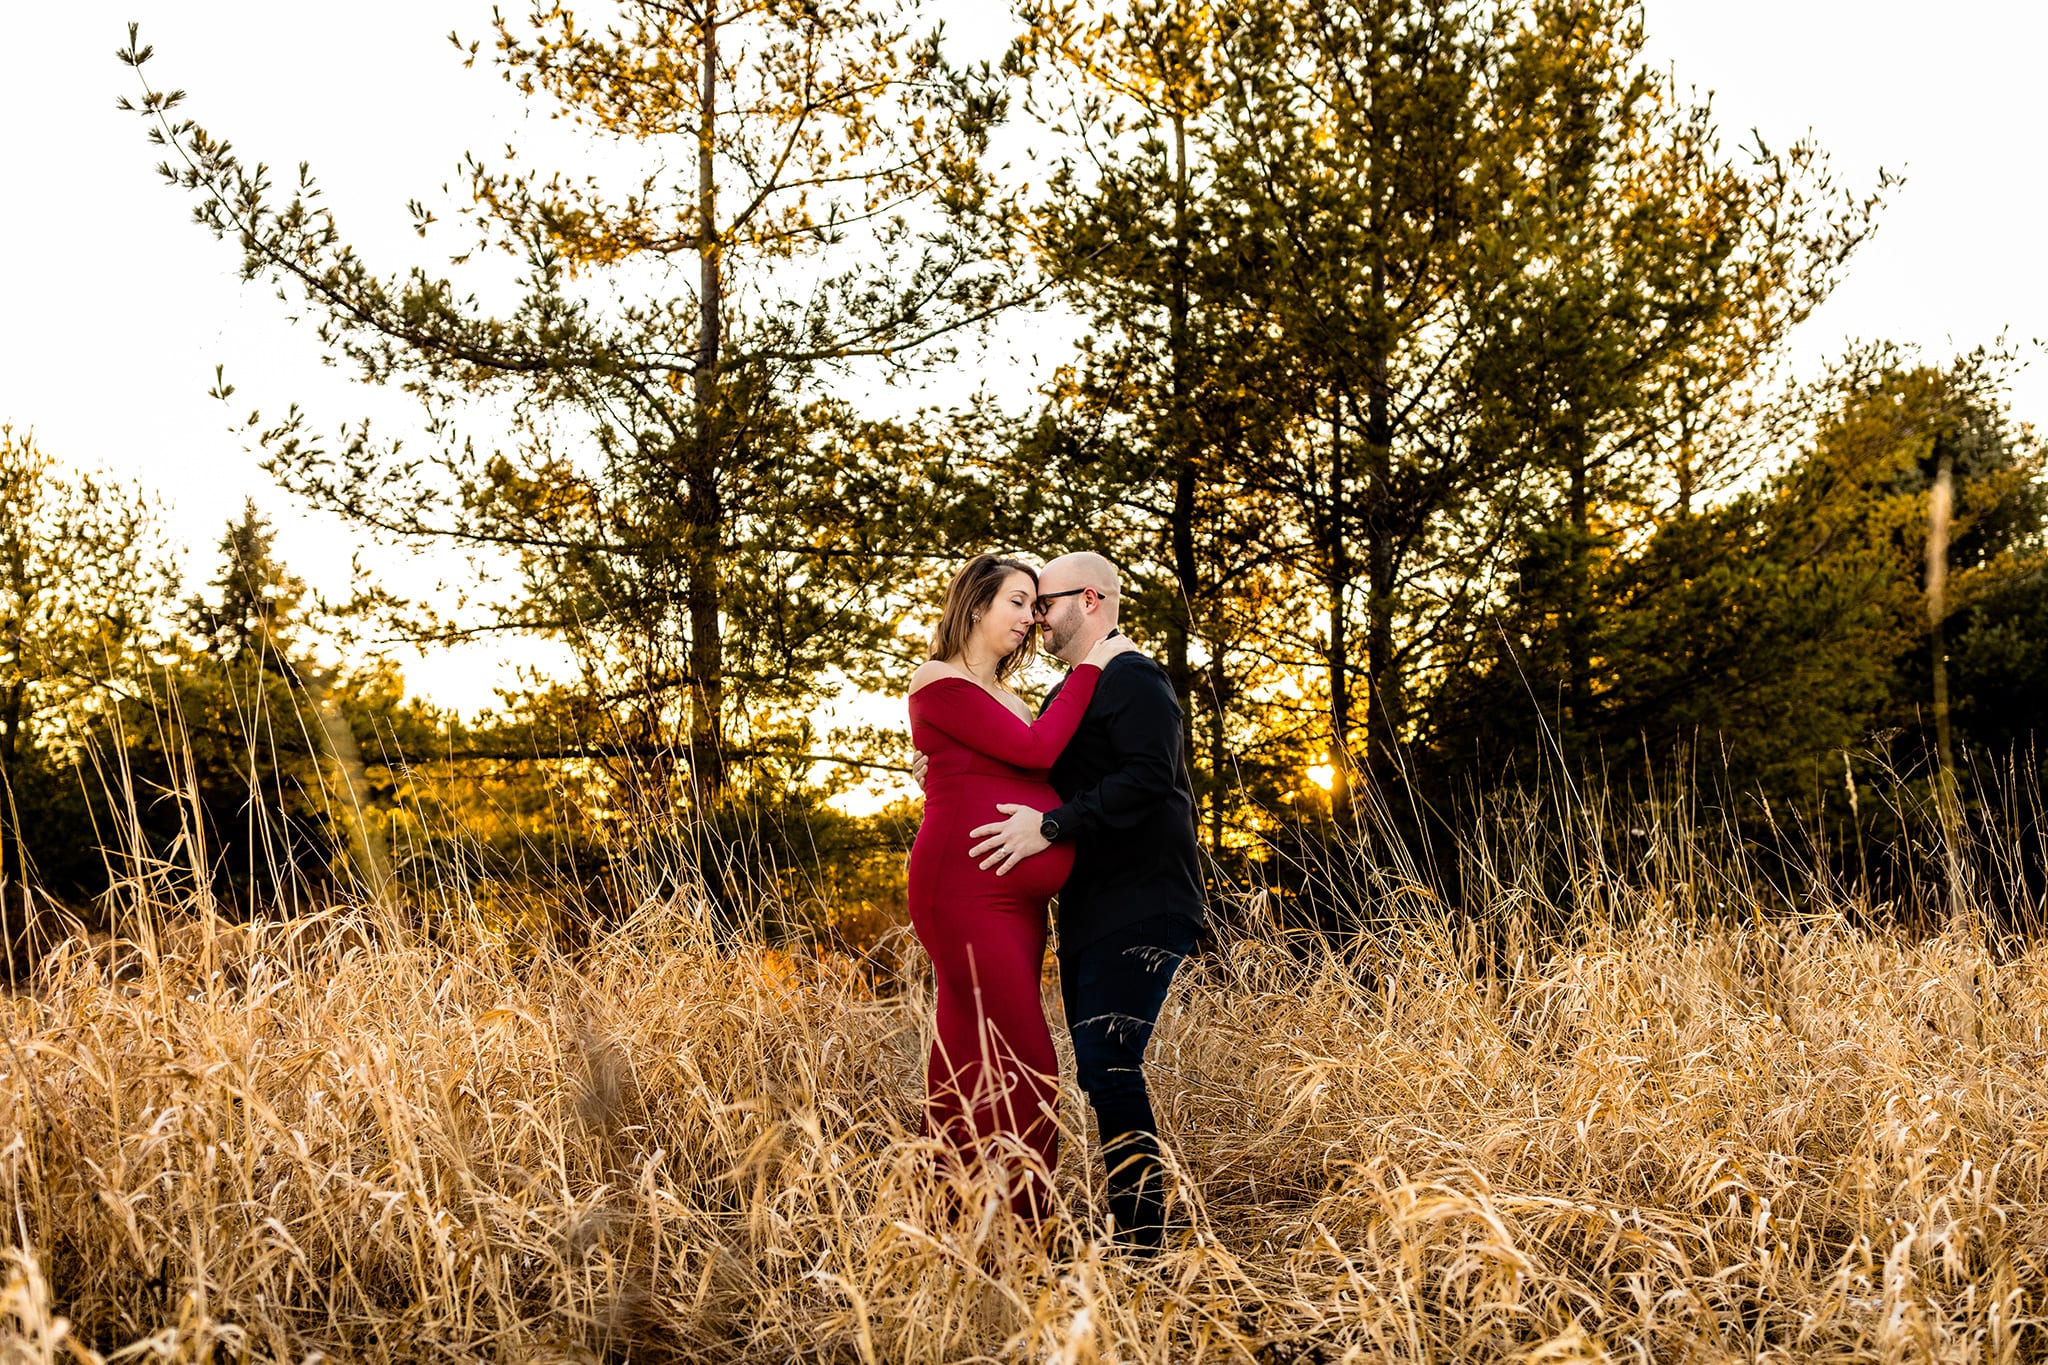 pregnant woman in red dress stands with husband in black shirt in tall grass near pine trees